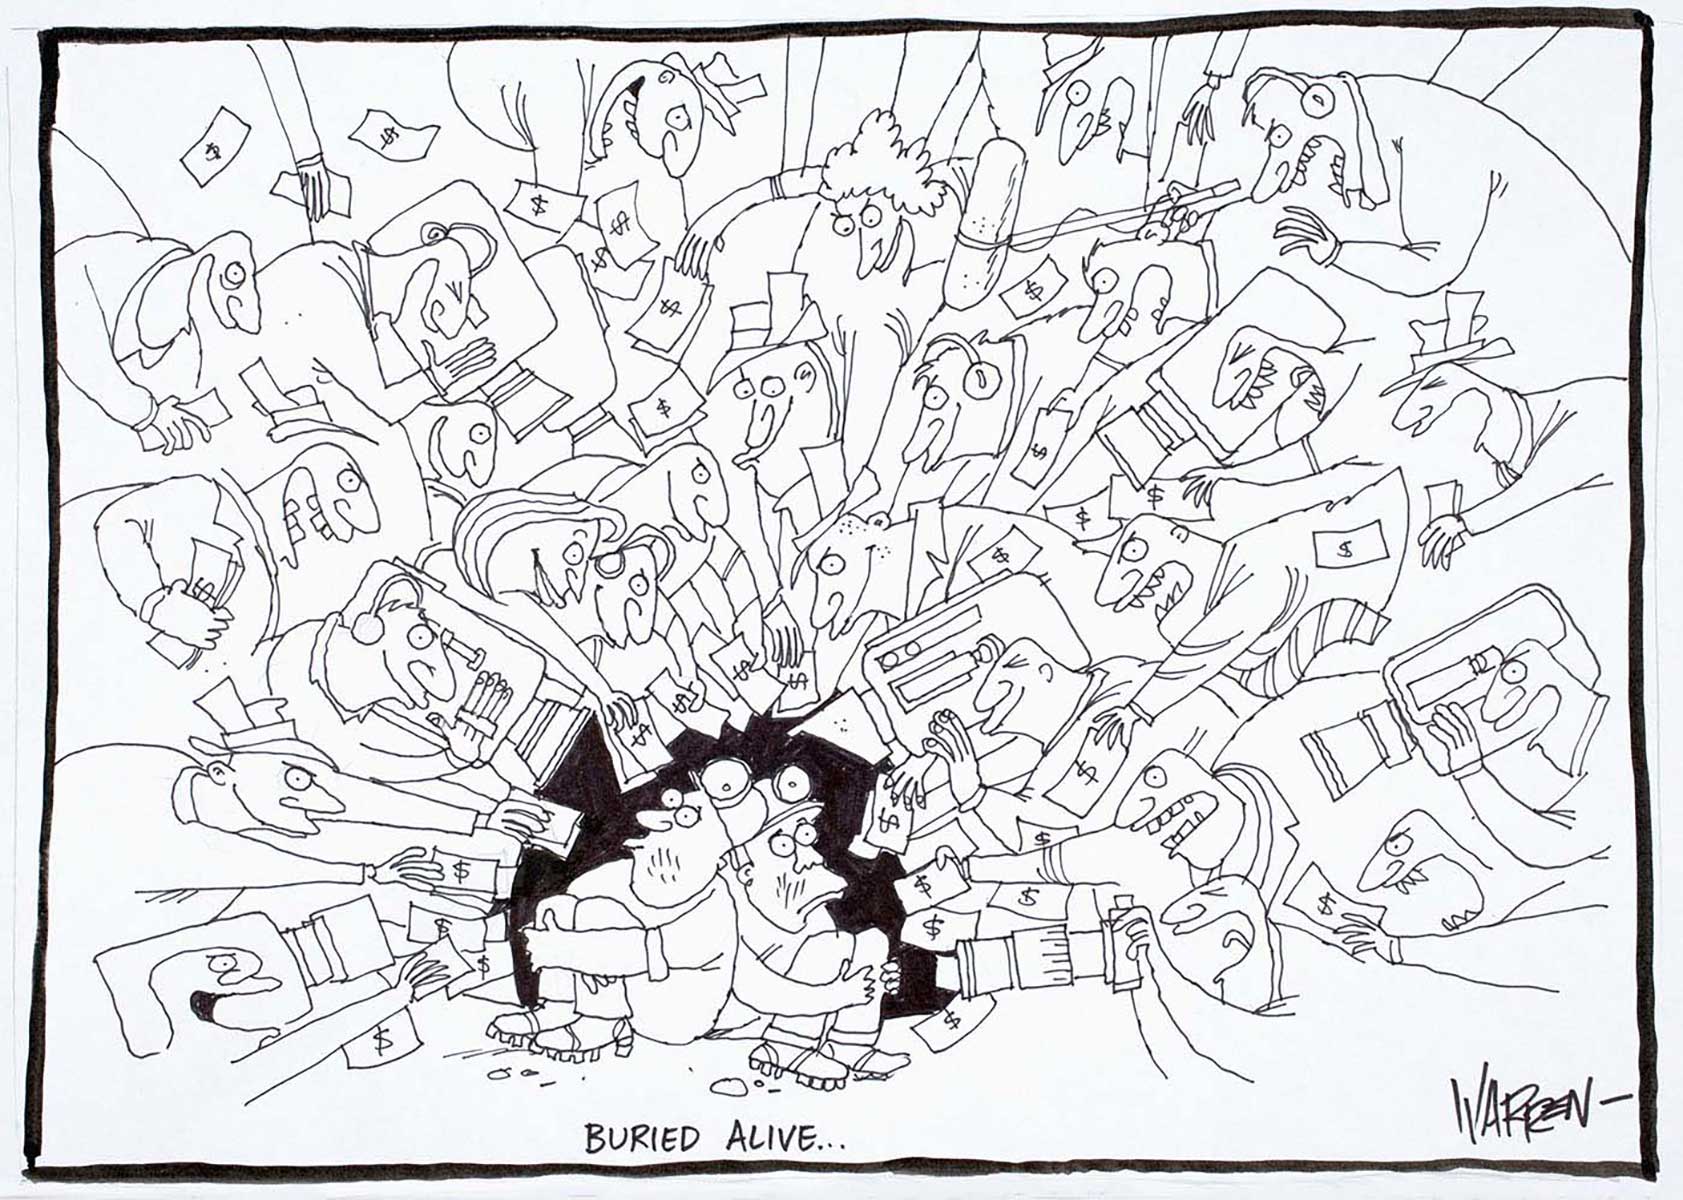 Political cartoon of two miners underground surrounded by a swarm of reporters, cameramen and people offering them money. - click to view larger image